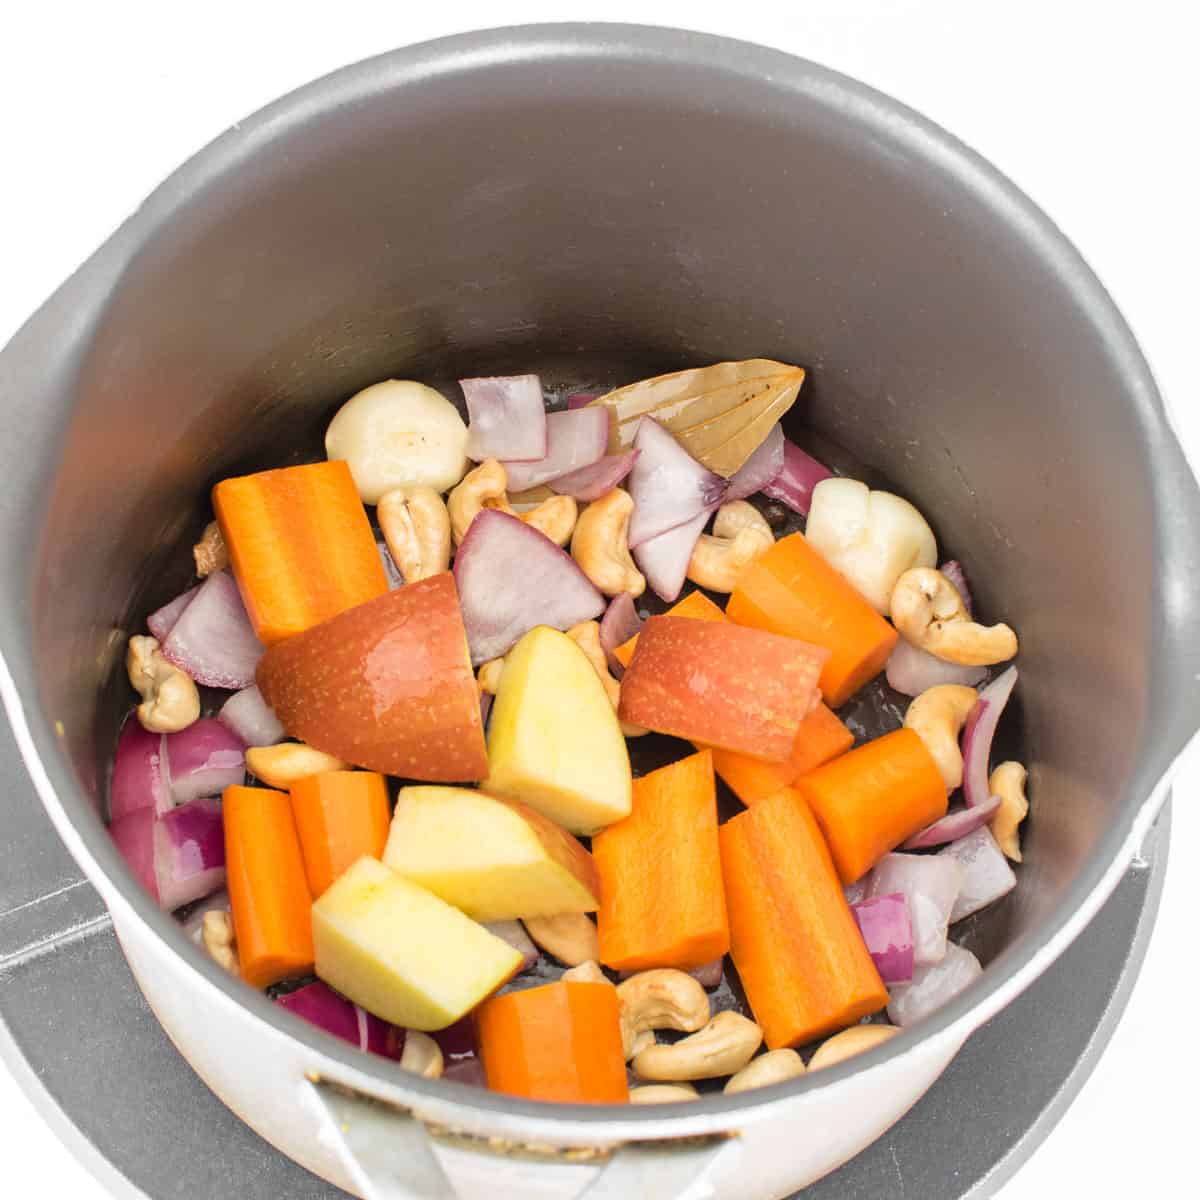 carrot and apples being cooked in the stockpot.